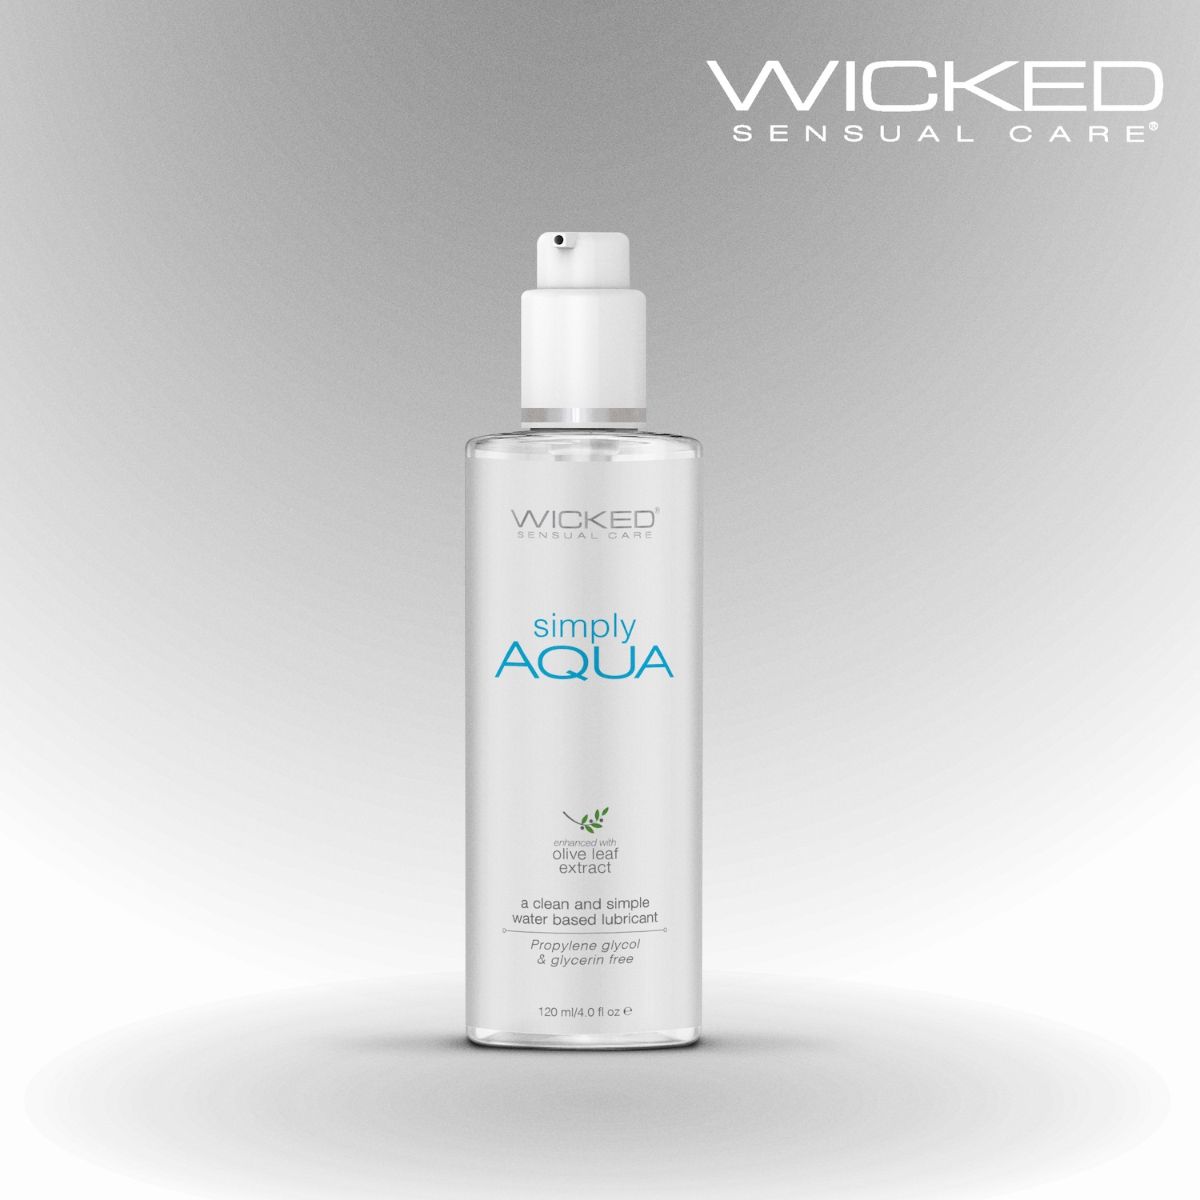 WICKED SENSUAL CARE’s simply™ AQUA Earns XBIZ 2021 Sex Lubricant of the Year Award 